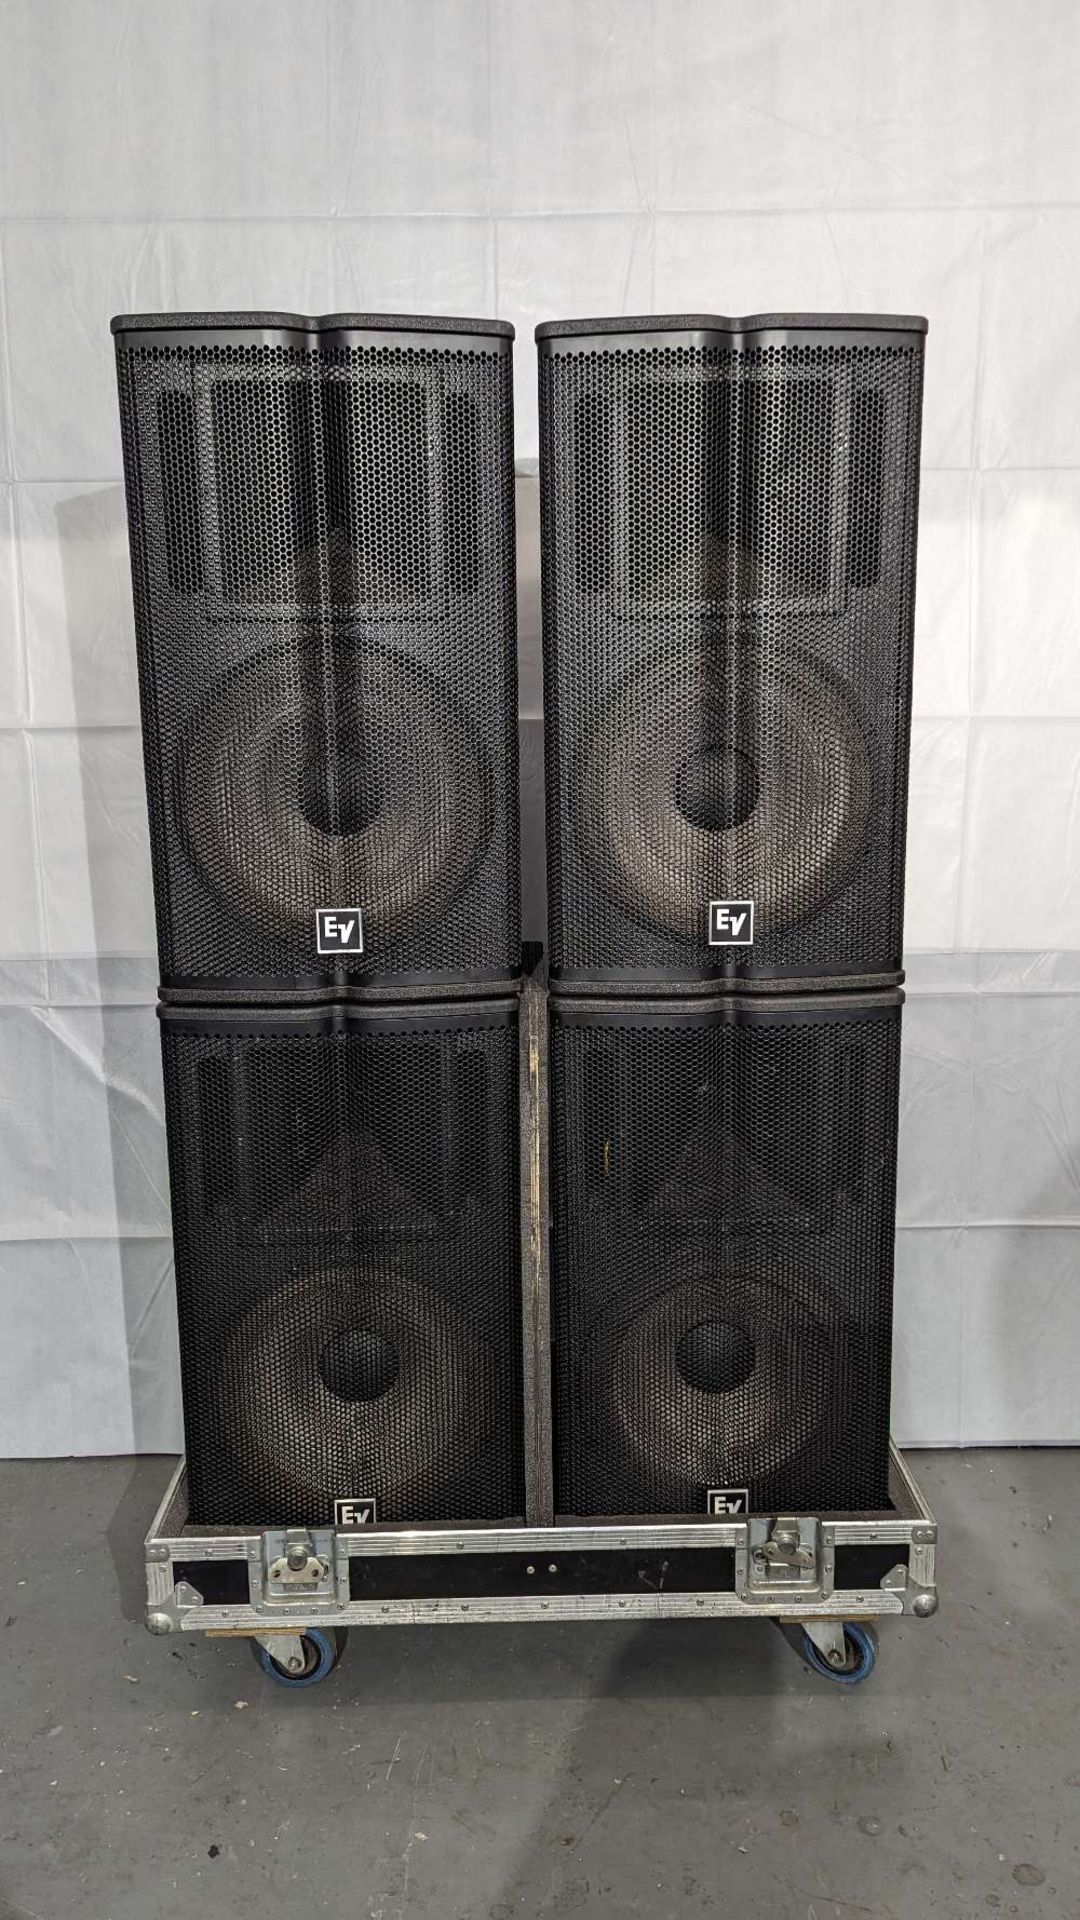 Electro-Voice PA Sound System - (4) TX1152 Speakers, (2) TX1181 Subs & Associated Equipment - Image 3 of 14